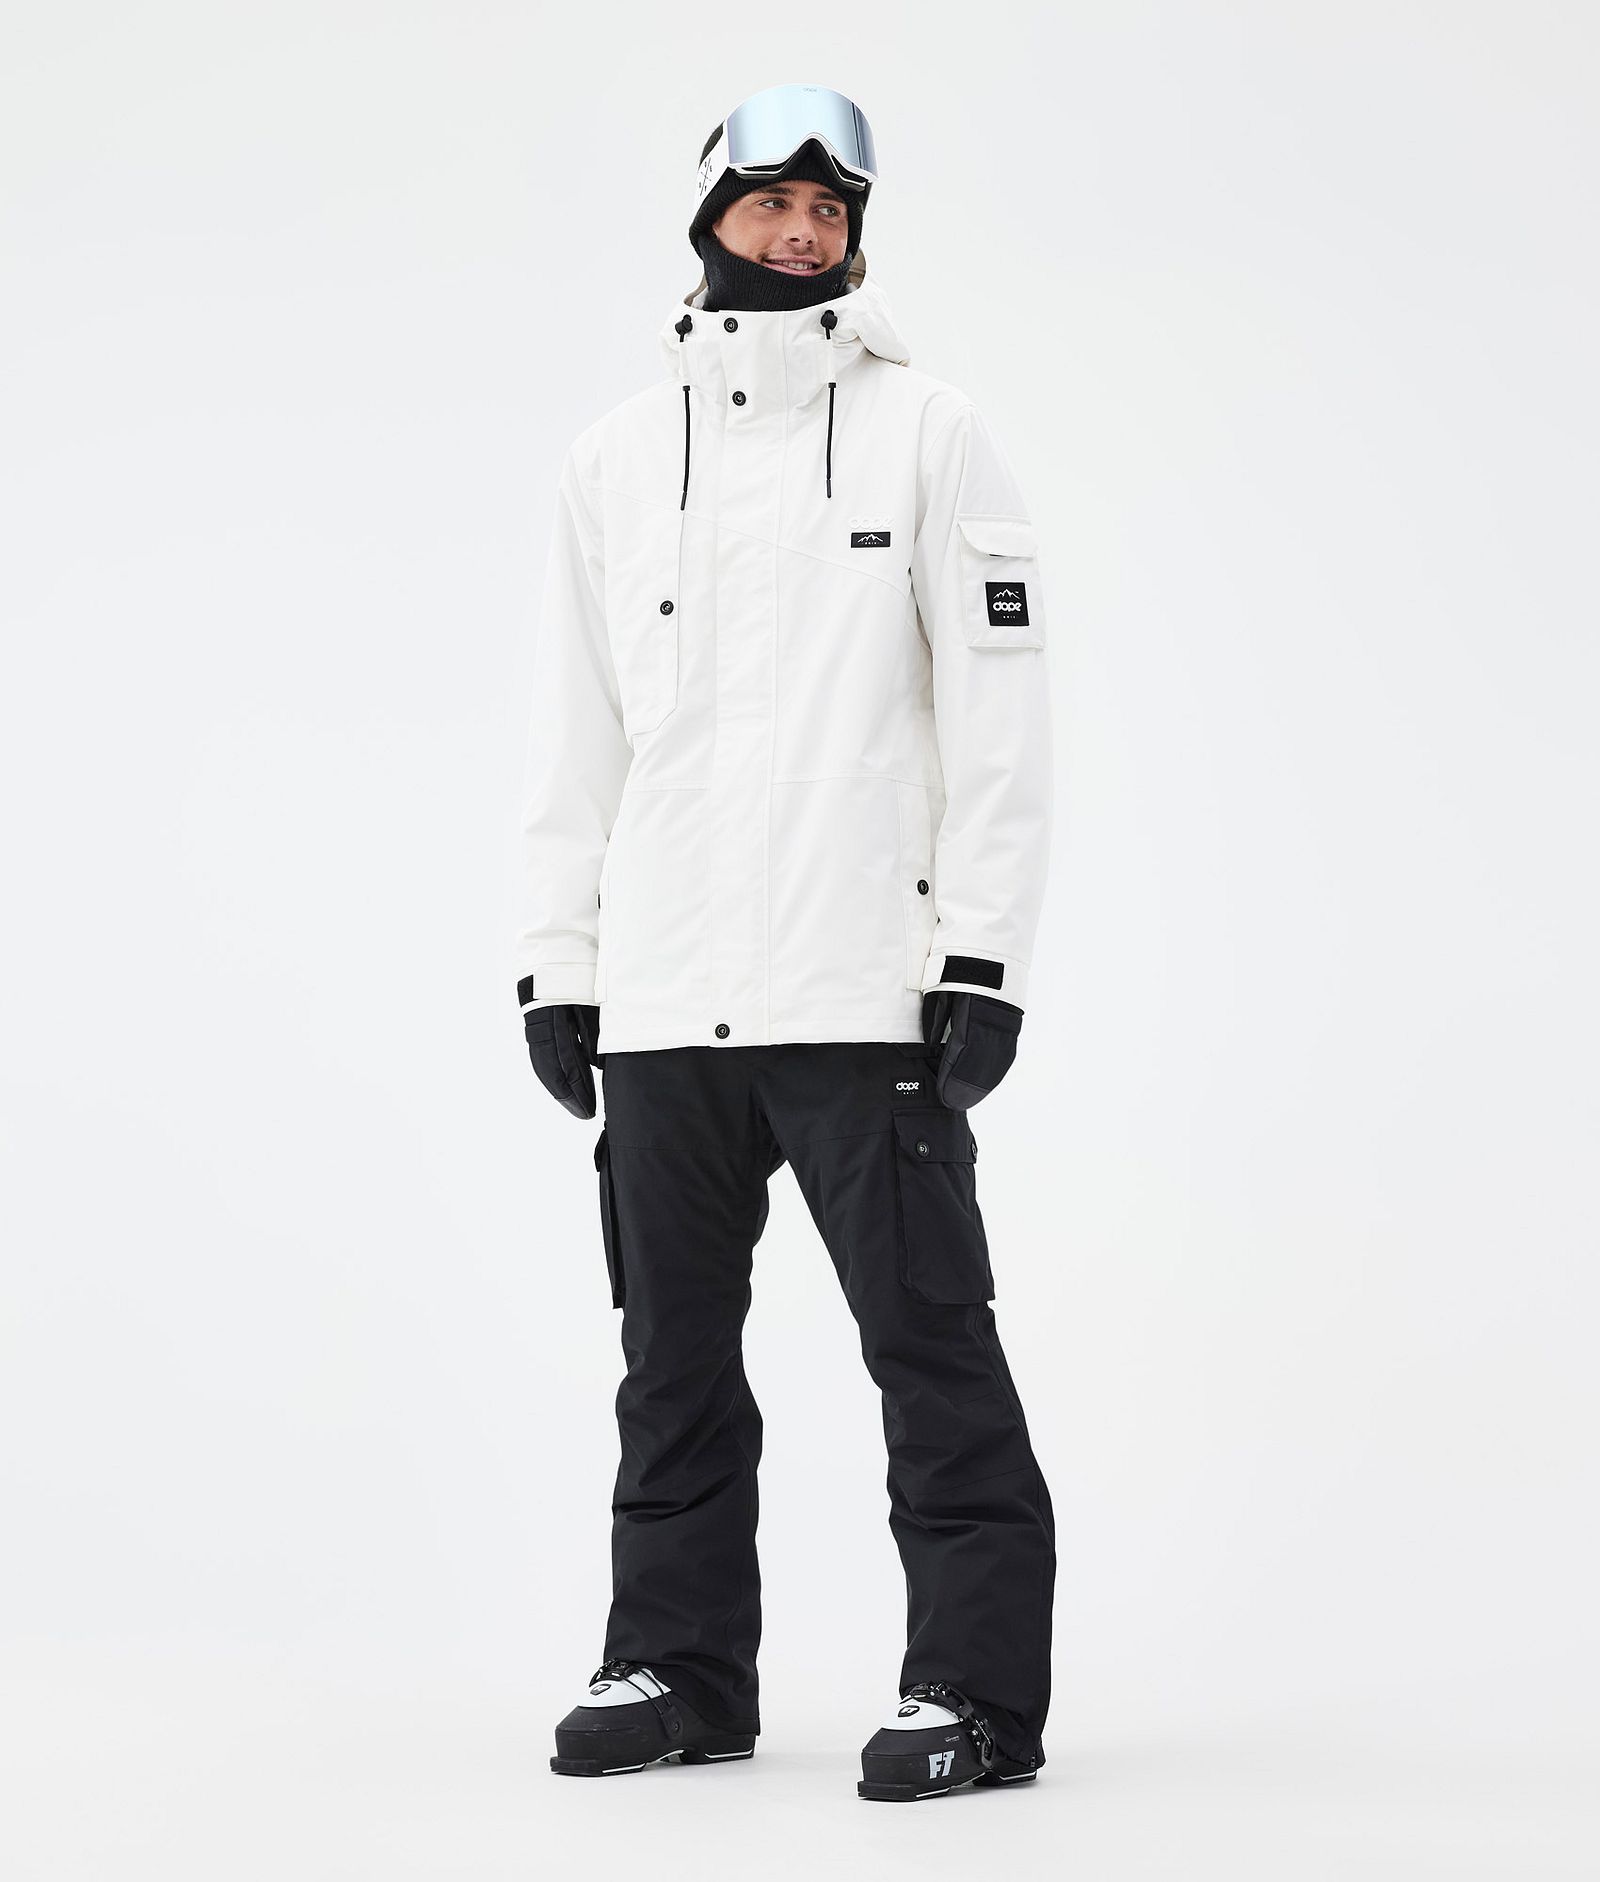 Dope Adept Laskettelu Outfit Miehet Old White/Blackout